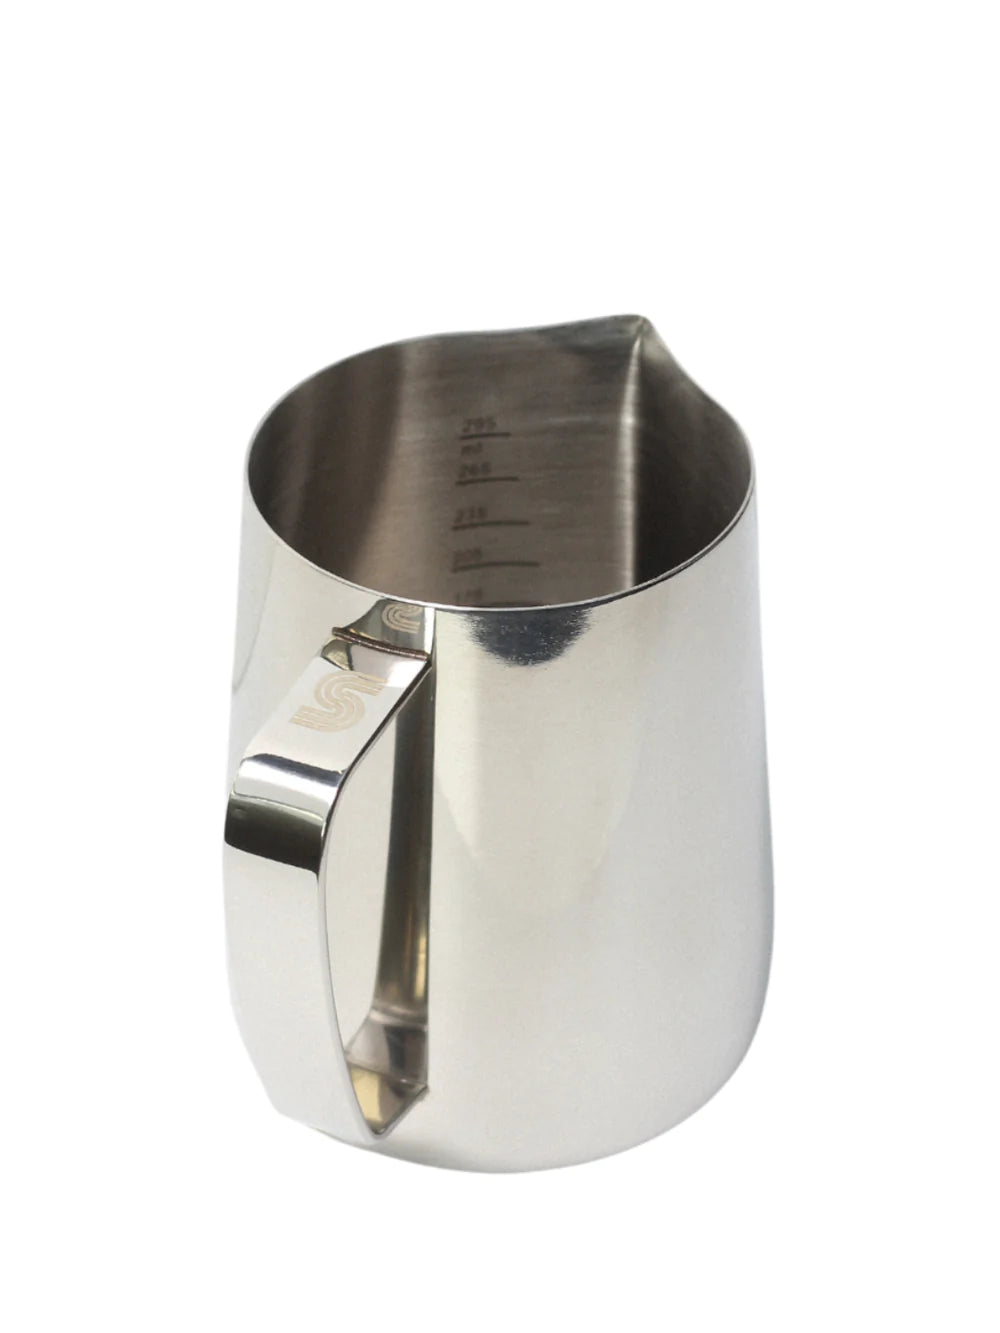 Pichet à lait PitchPerfect 12oz / Stainless steel - Image 1